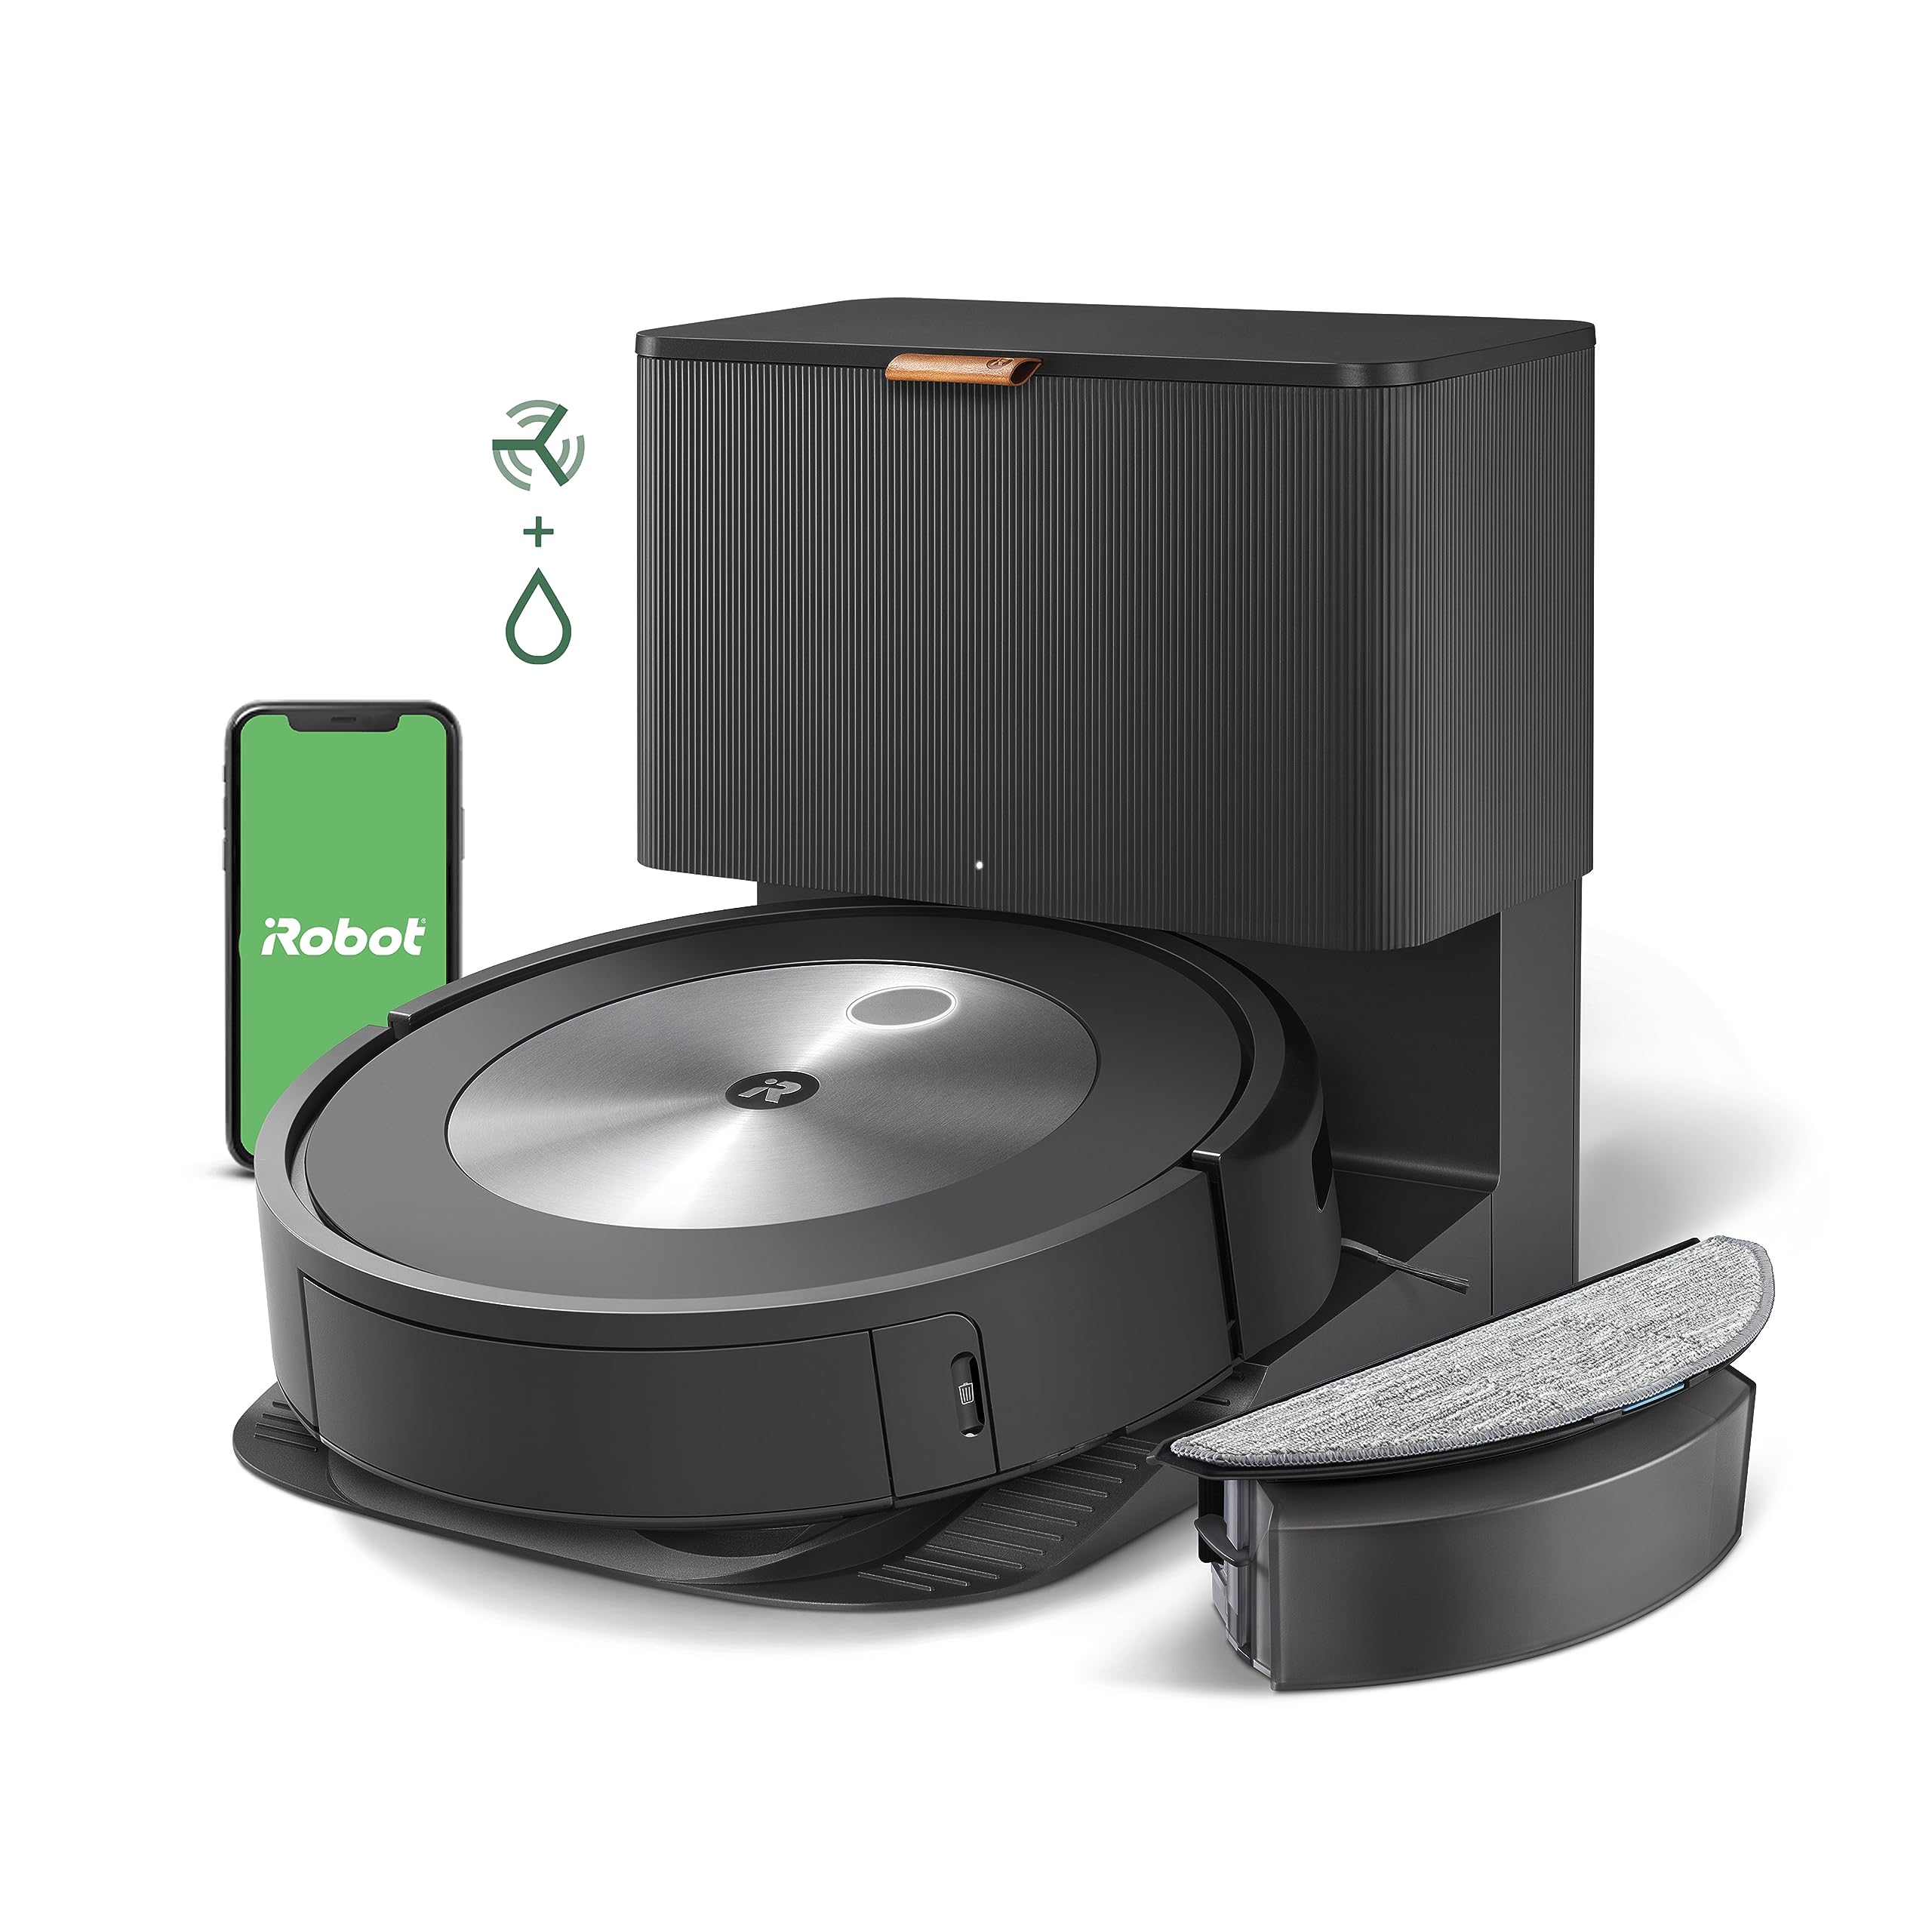 iRobot Roomba Combo j5+ Self-Emptying Robot Vac/Mop - Avoids Obstacles, Empties for 60 Days, Smart Mapping, Alexa $449